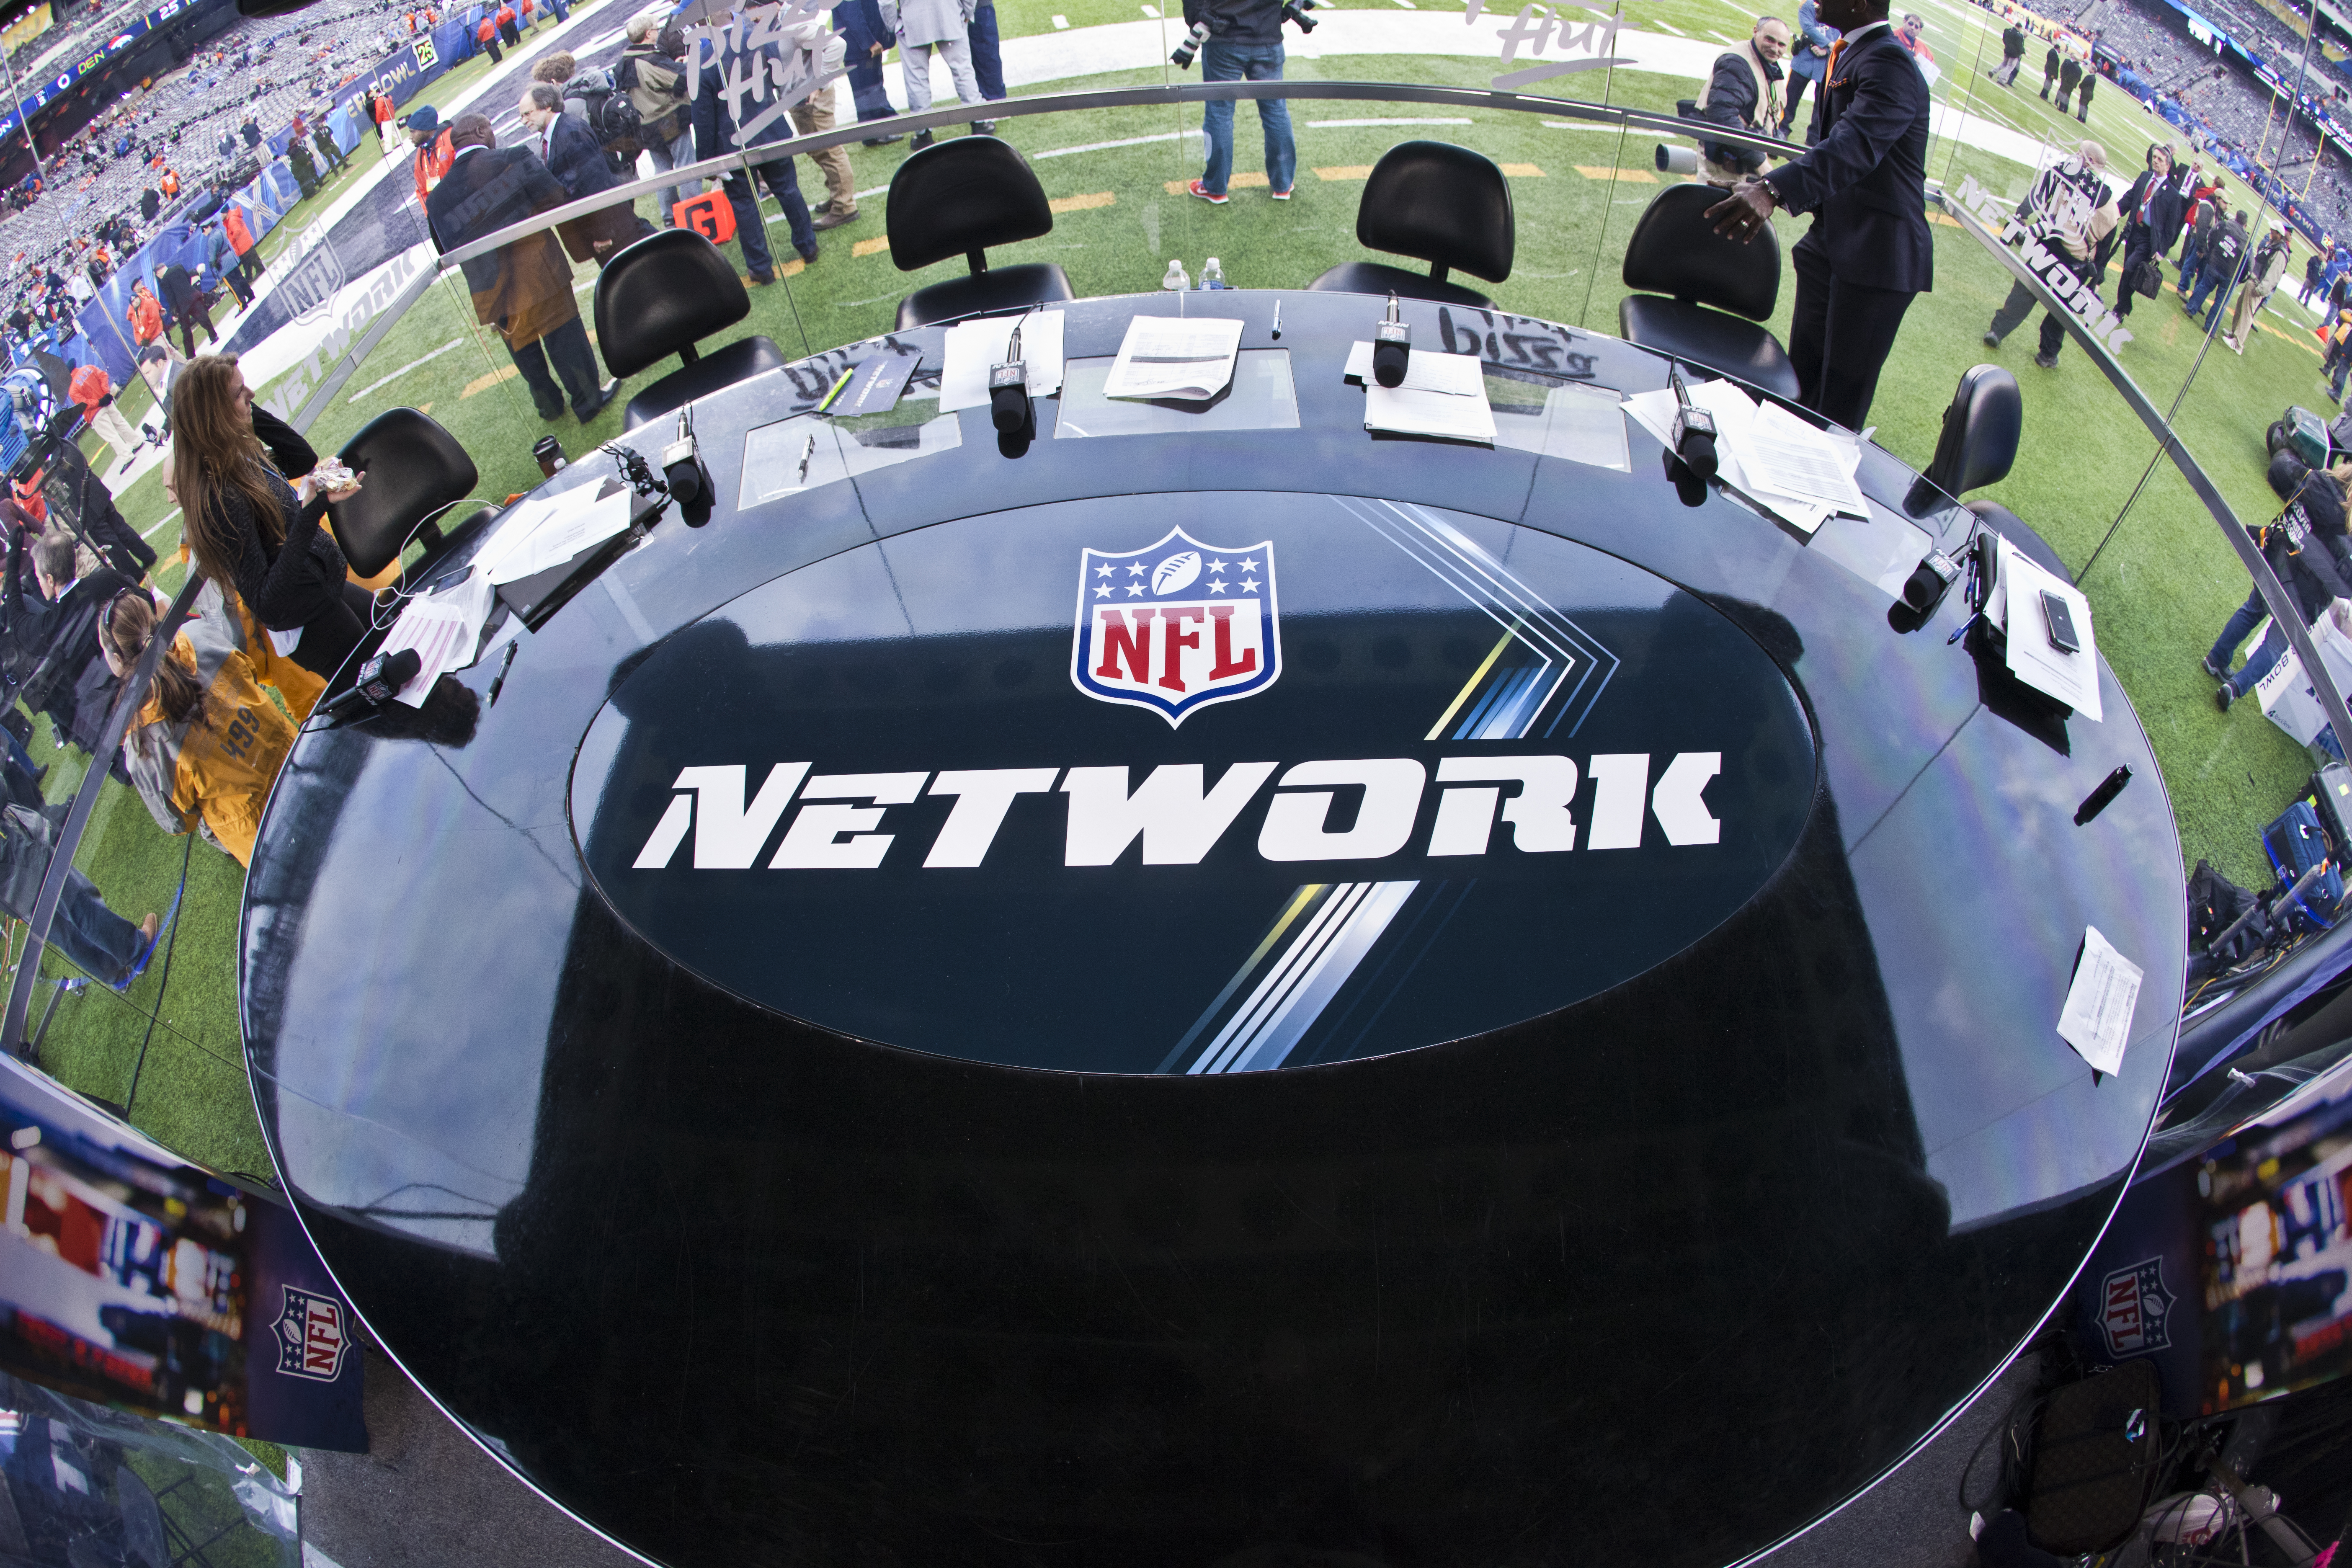 nfl network super bowl replay